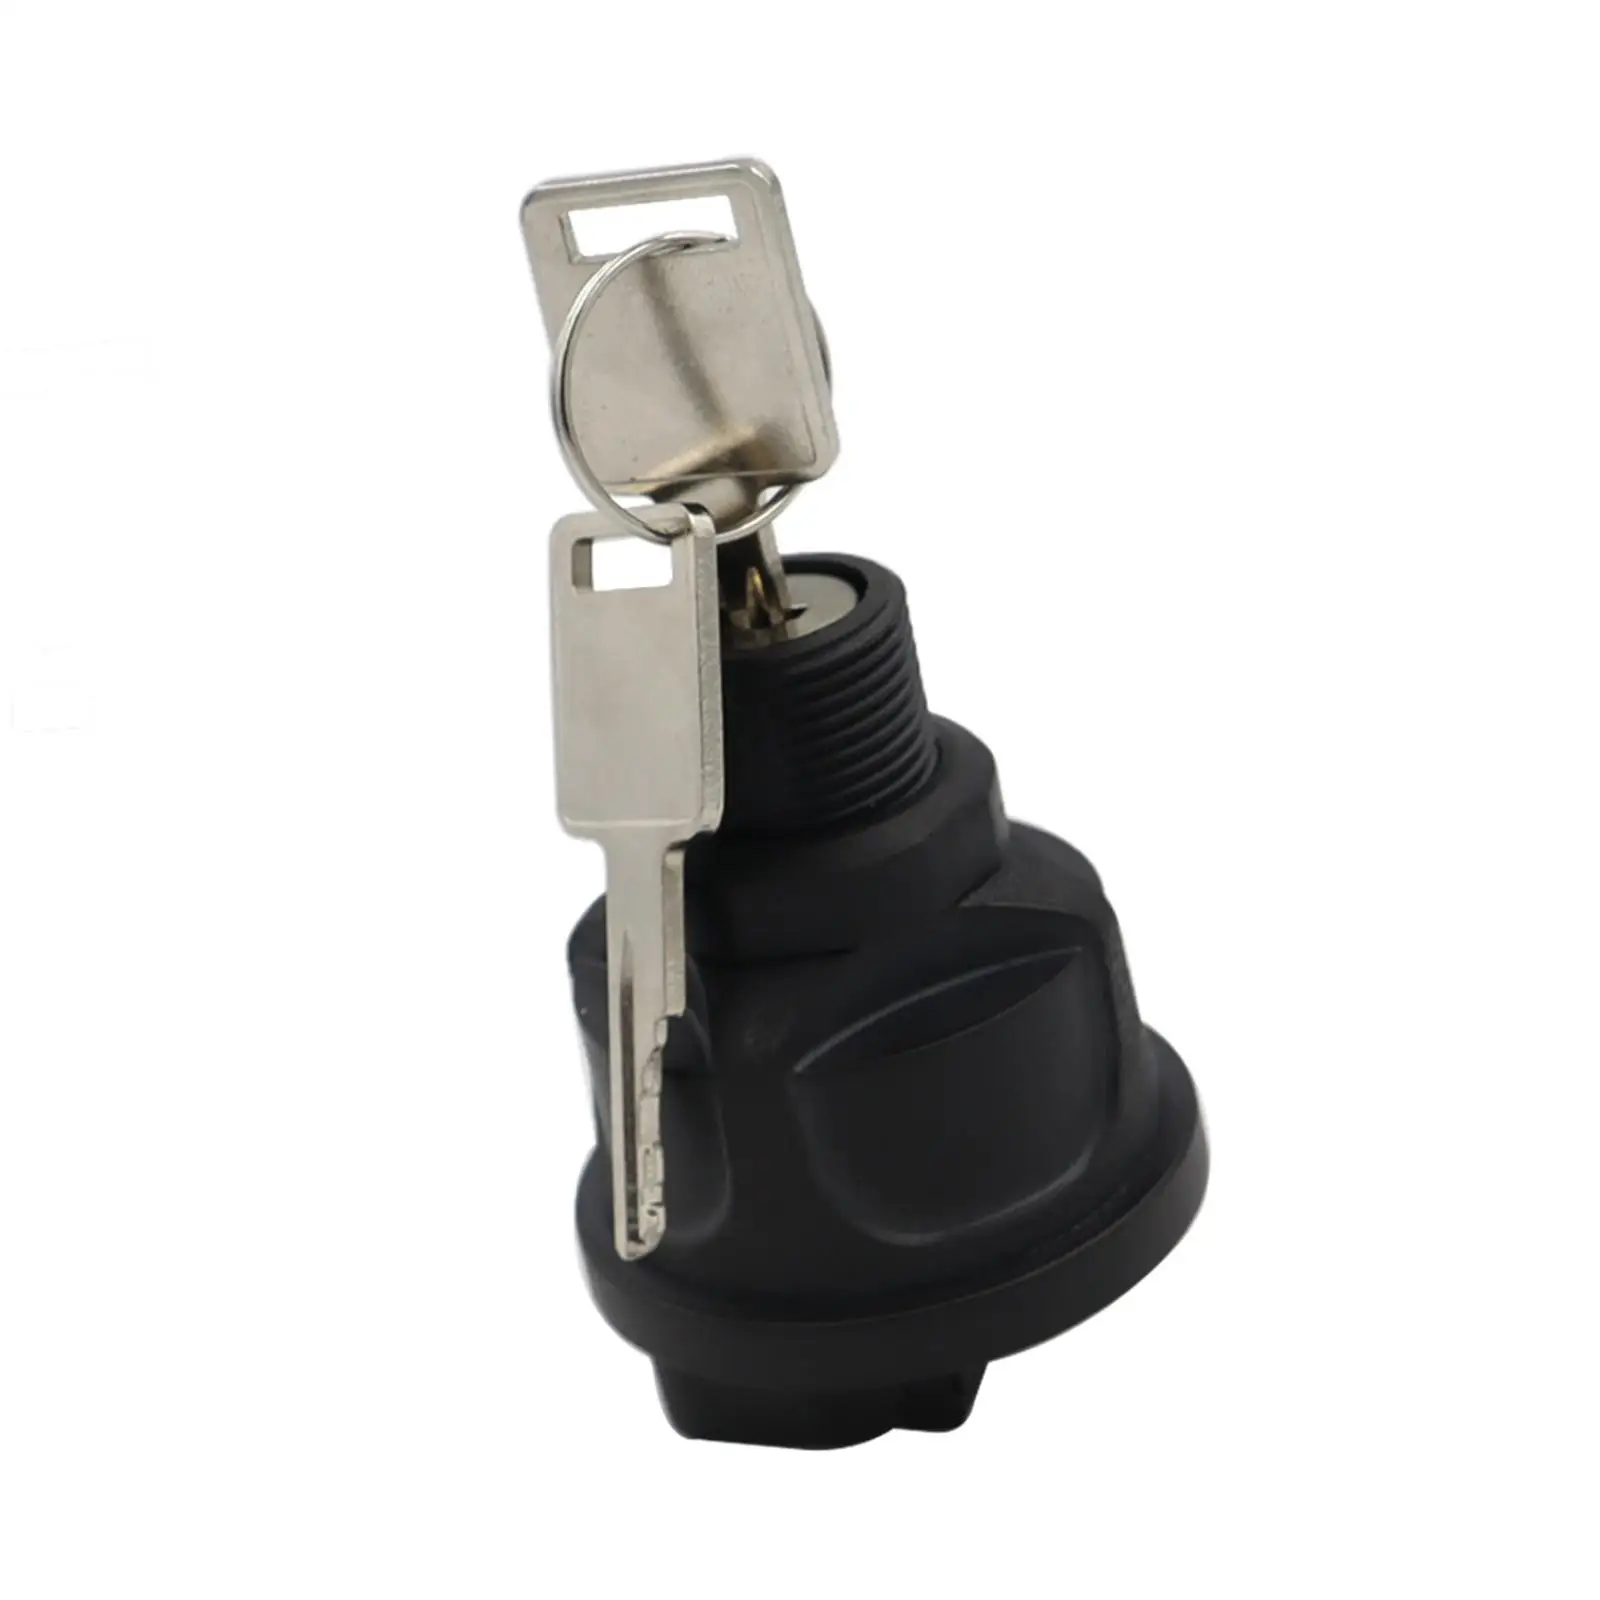 Ignition Key Switch Repalces Durable High Performance for Bobcat Loaders S550 S185